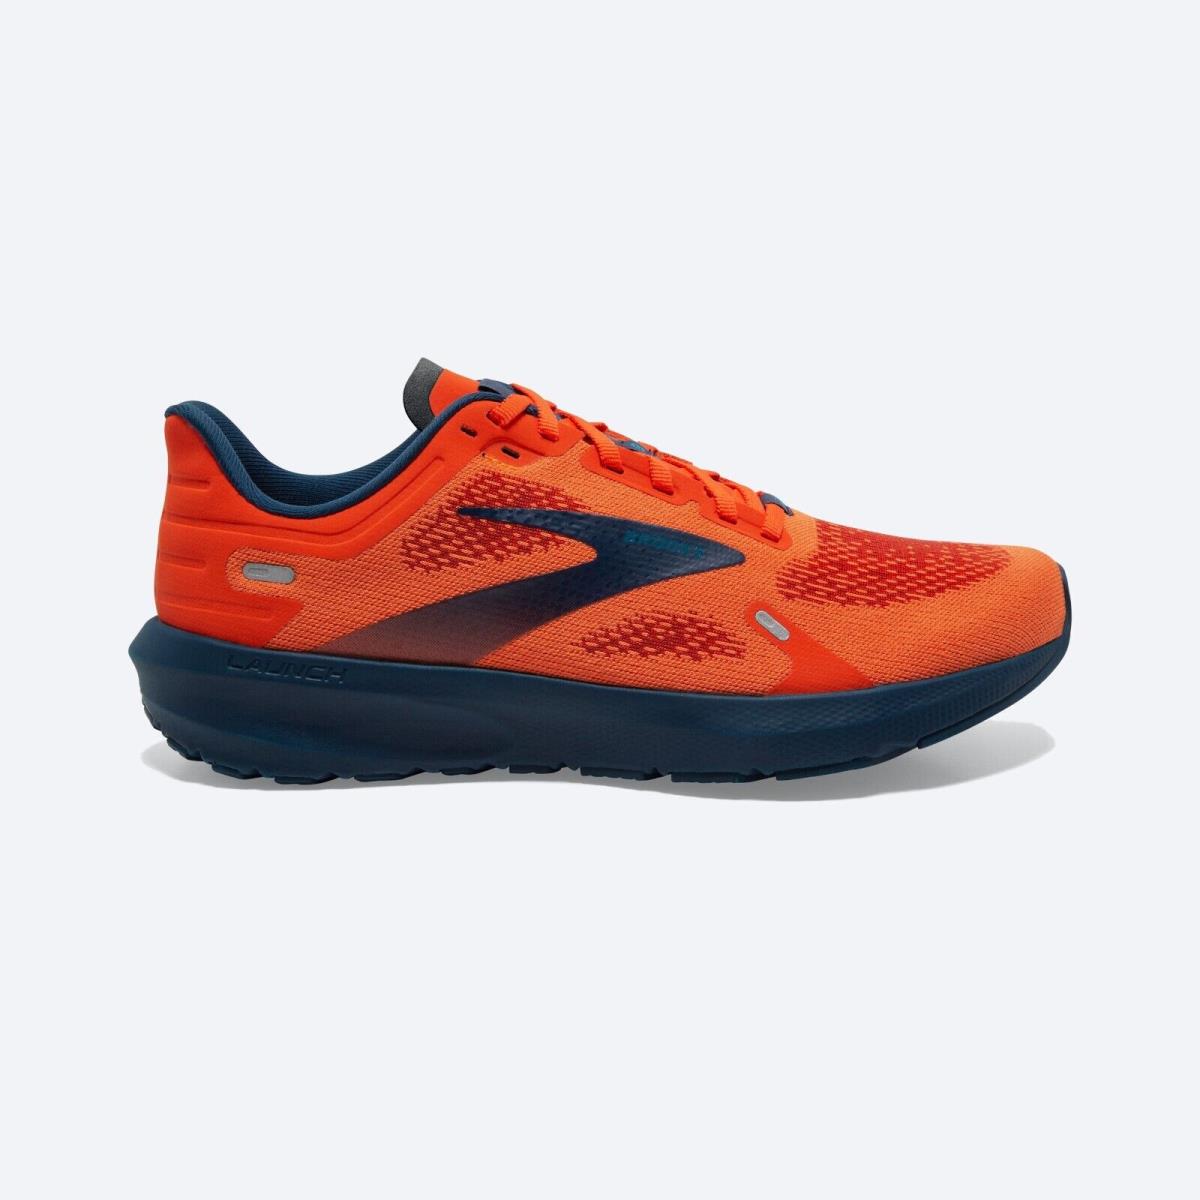 Brooks Speed Neutral Orange Flame/titan/teal Launch 9 Running Shoes 11.5 45.5